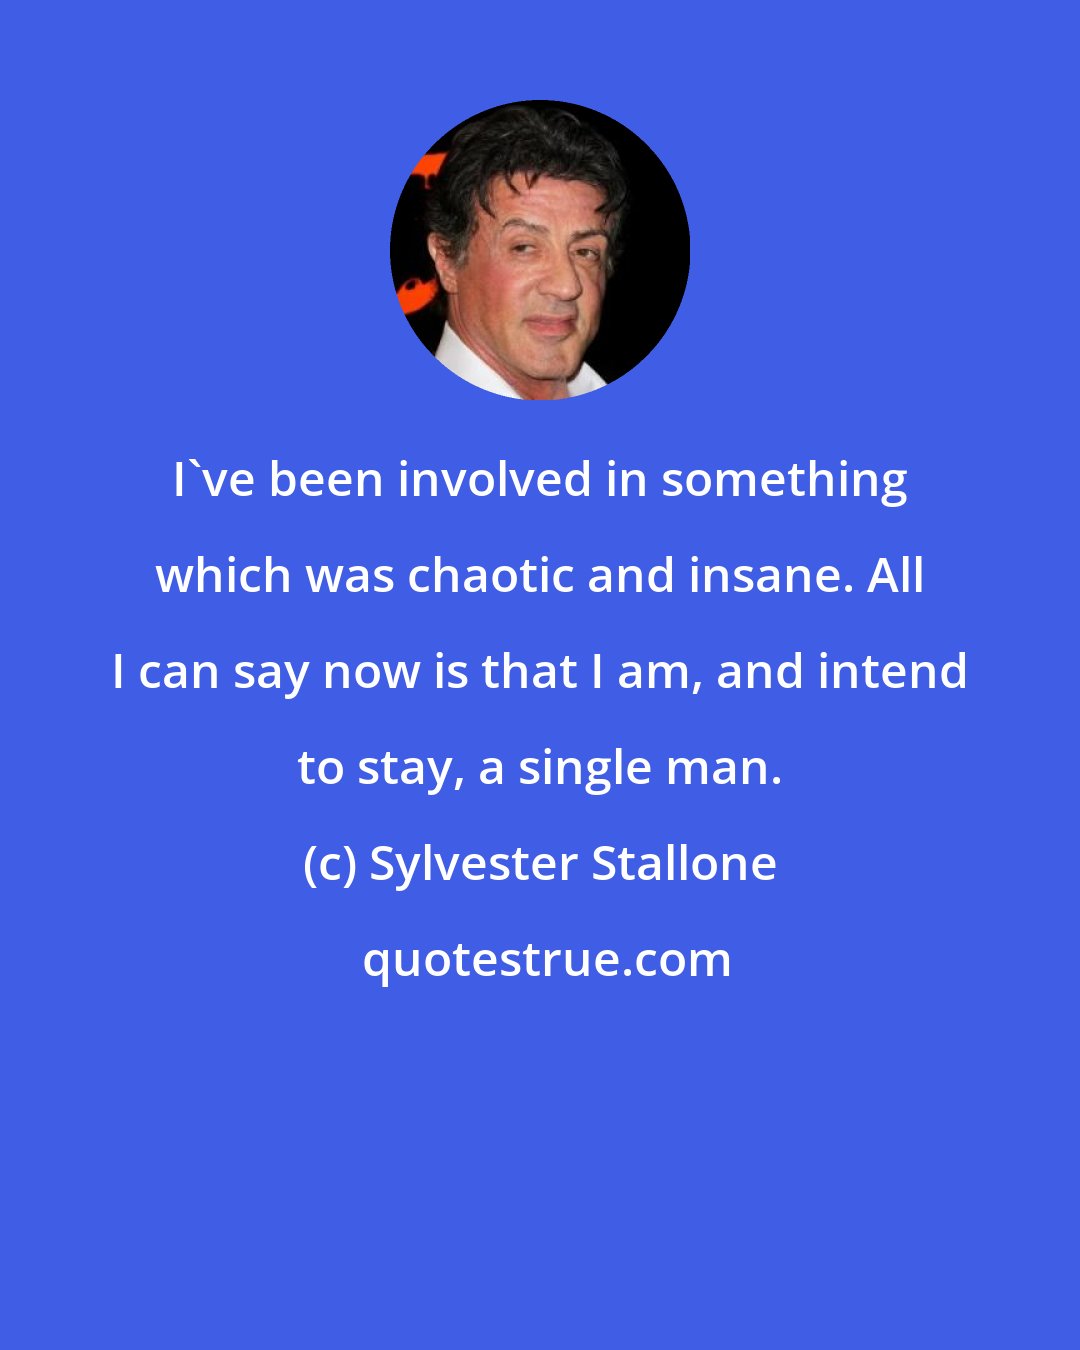 Sylvester Stallone: I've been involved in something which was chaotic and insane. All I can say now is that I am, and intend to stay, a single man.